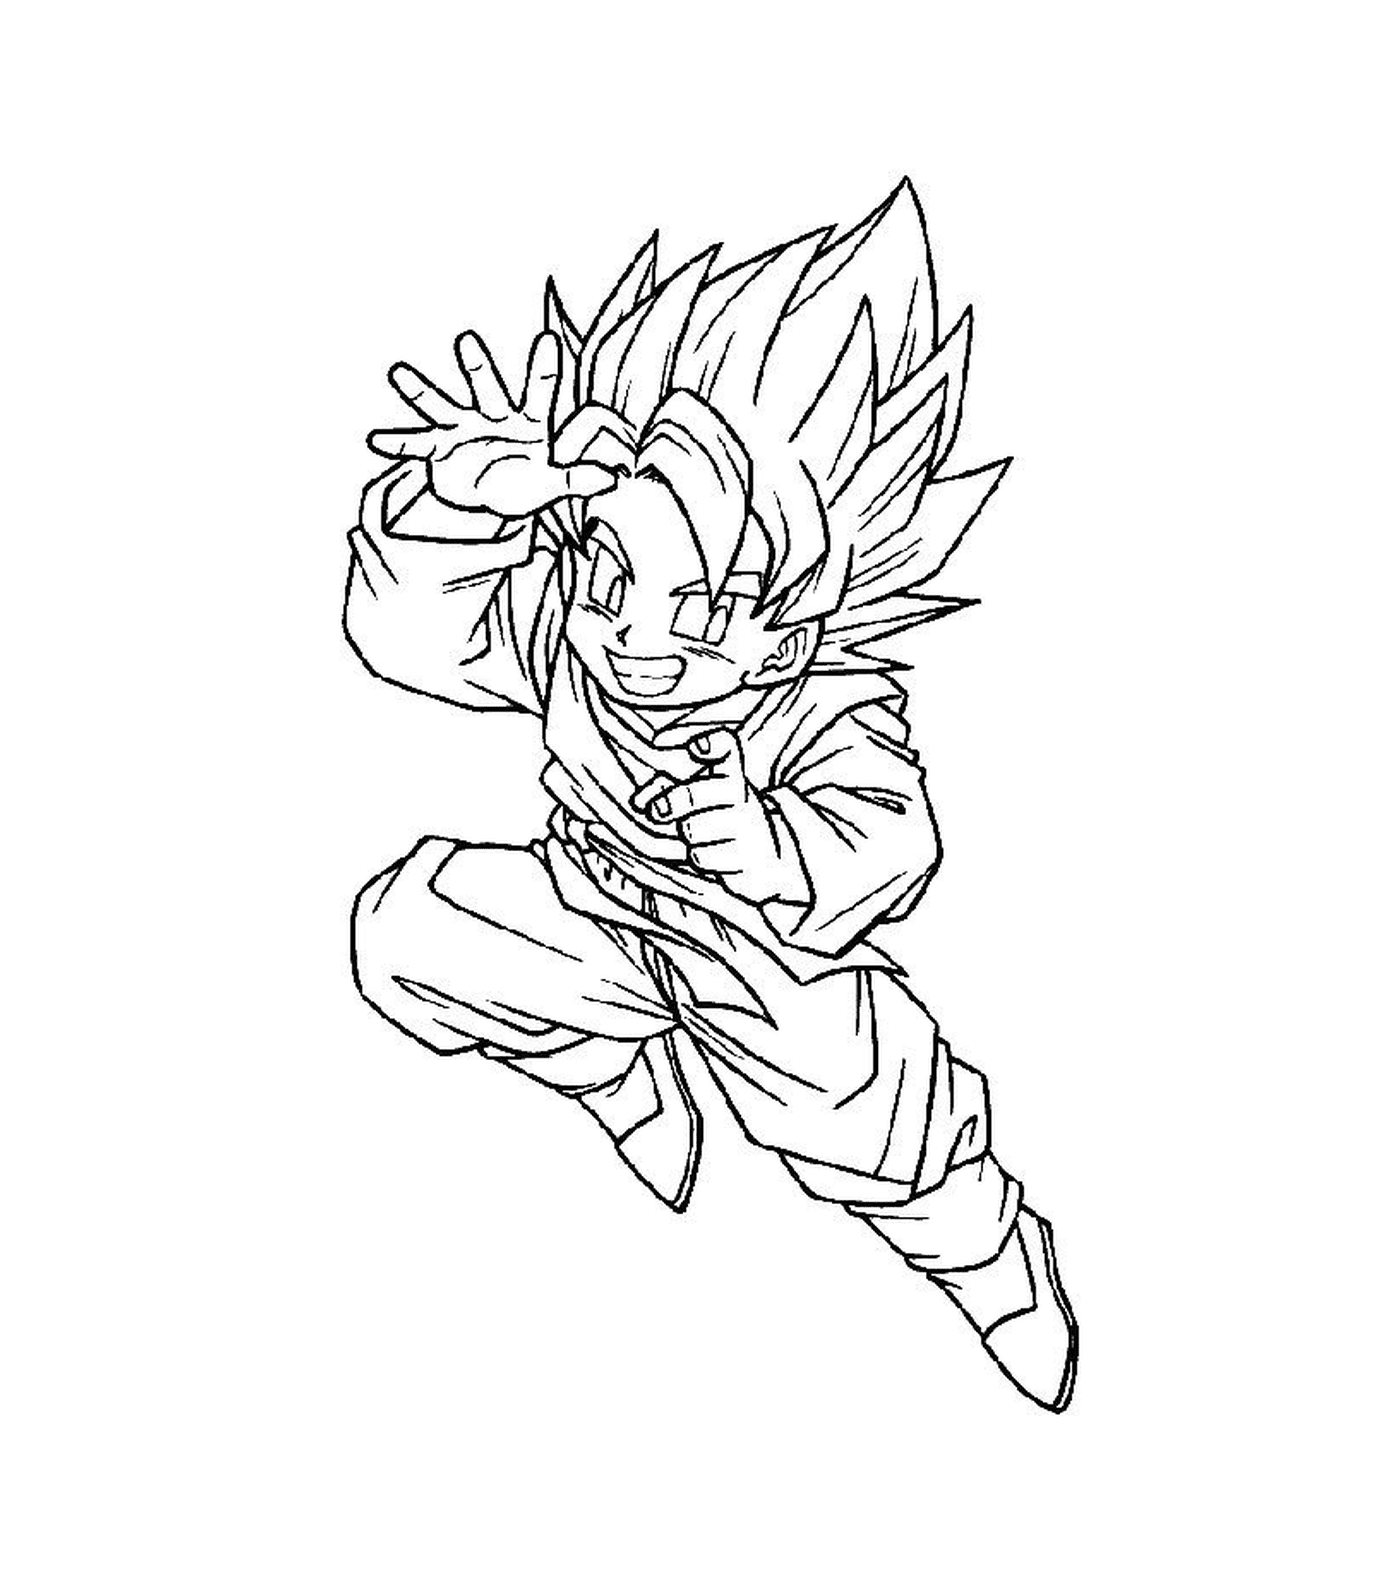  Young Goku in action 